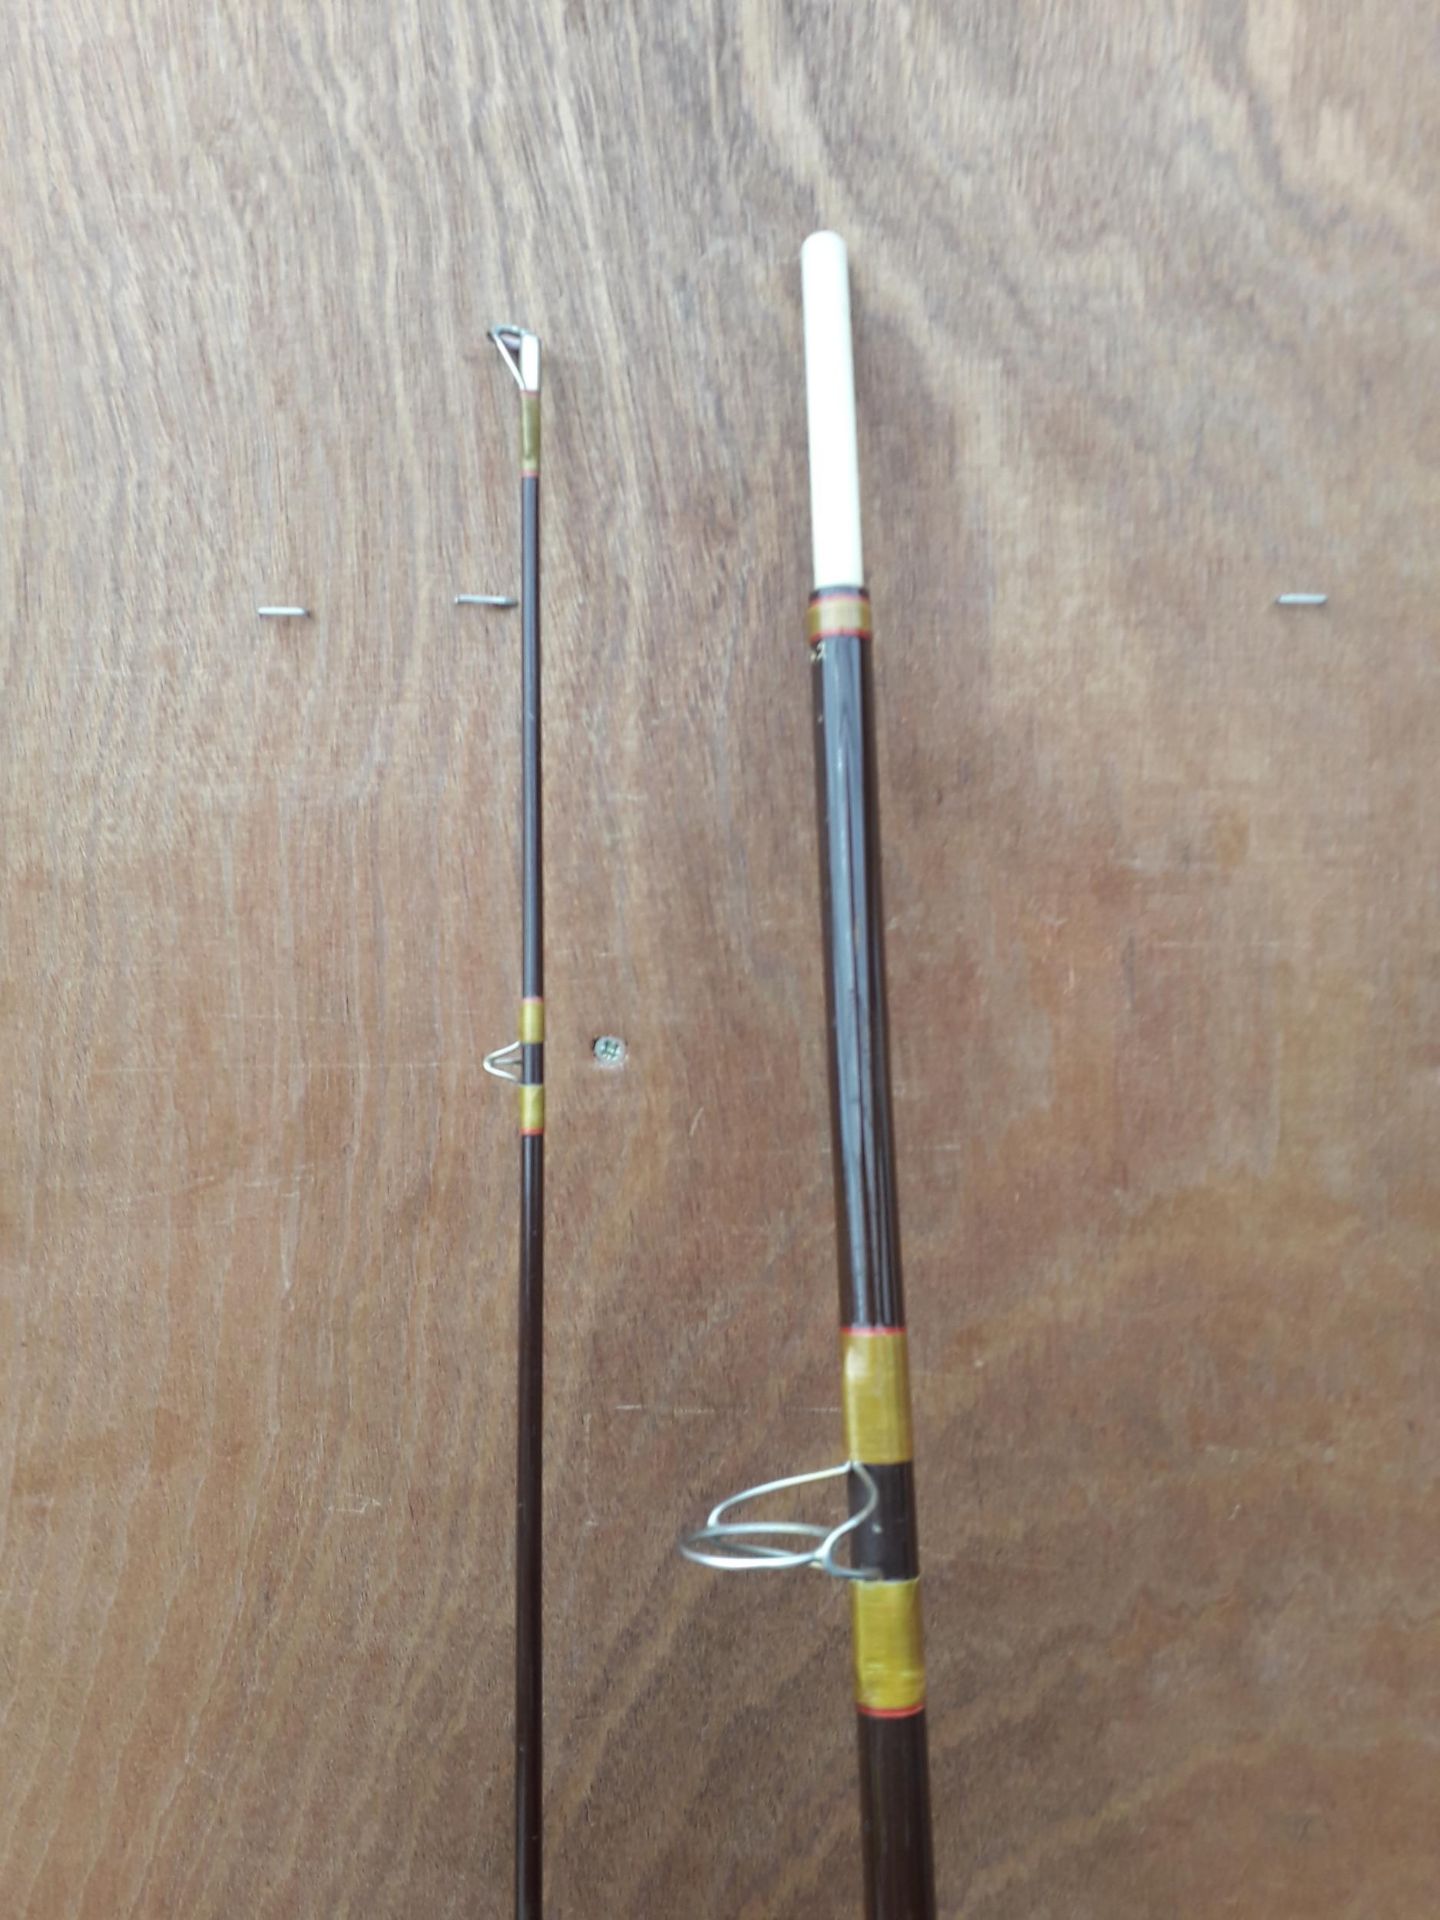 A HARDY JET 9.5' FIBALITE SPINING FISHING ROD IN ORIGINAL BAG - Image 2 of 4